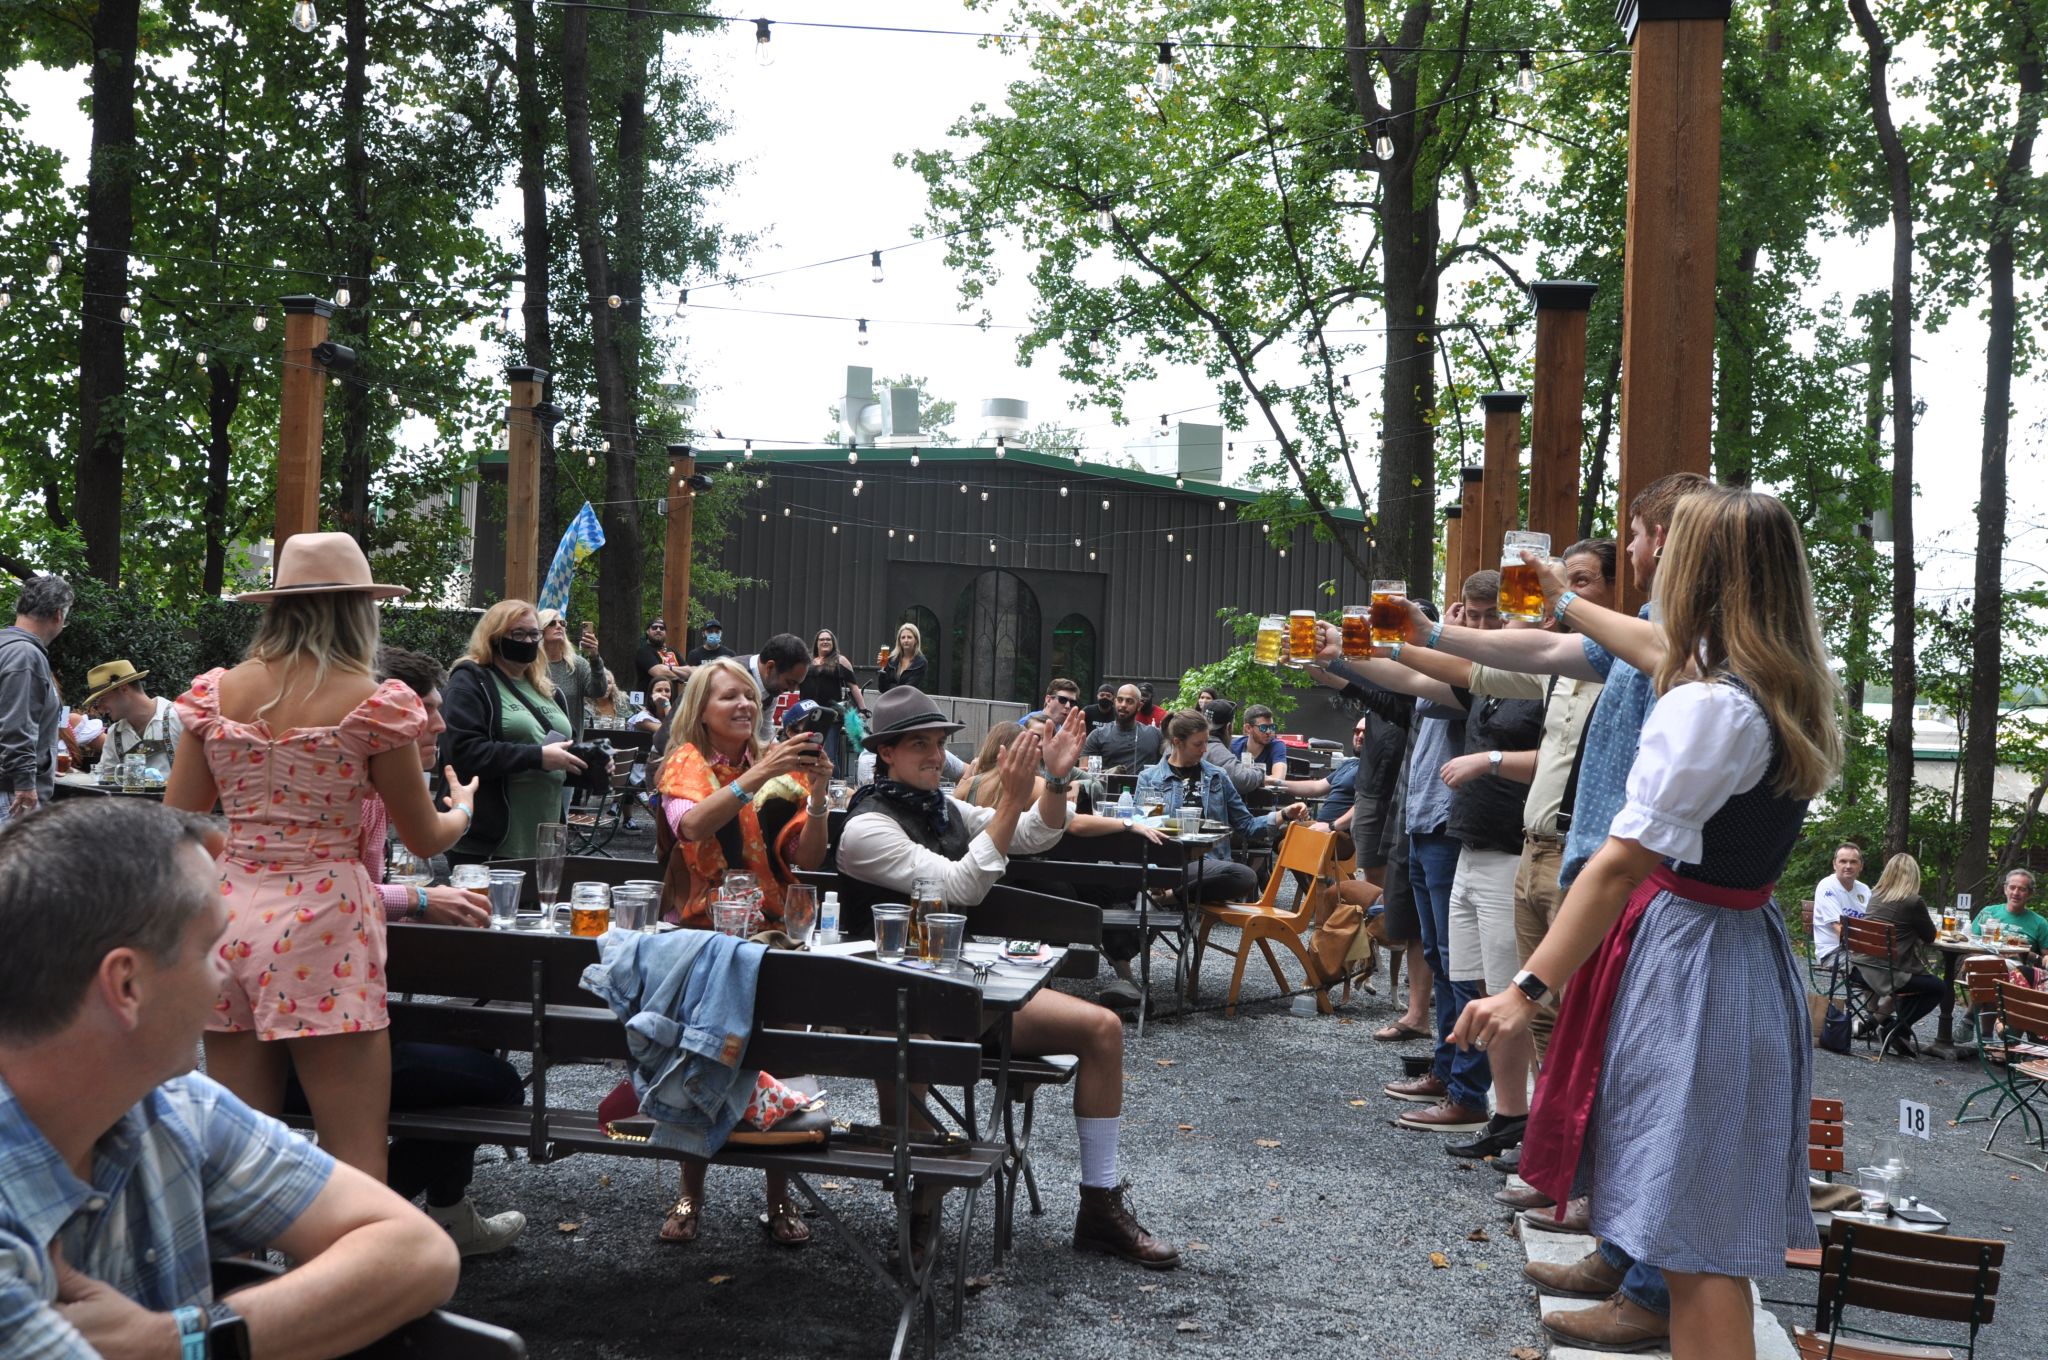 The Bold Monk Brewing beer garden awaits your arrival